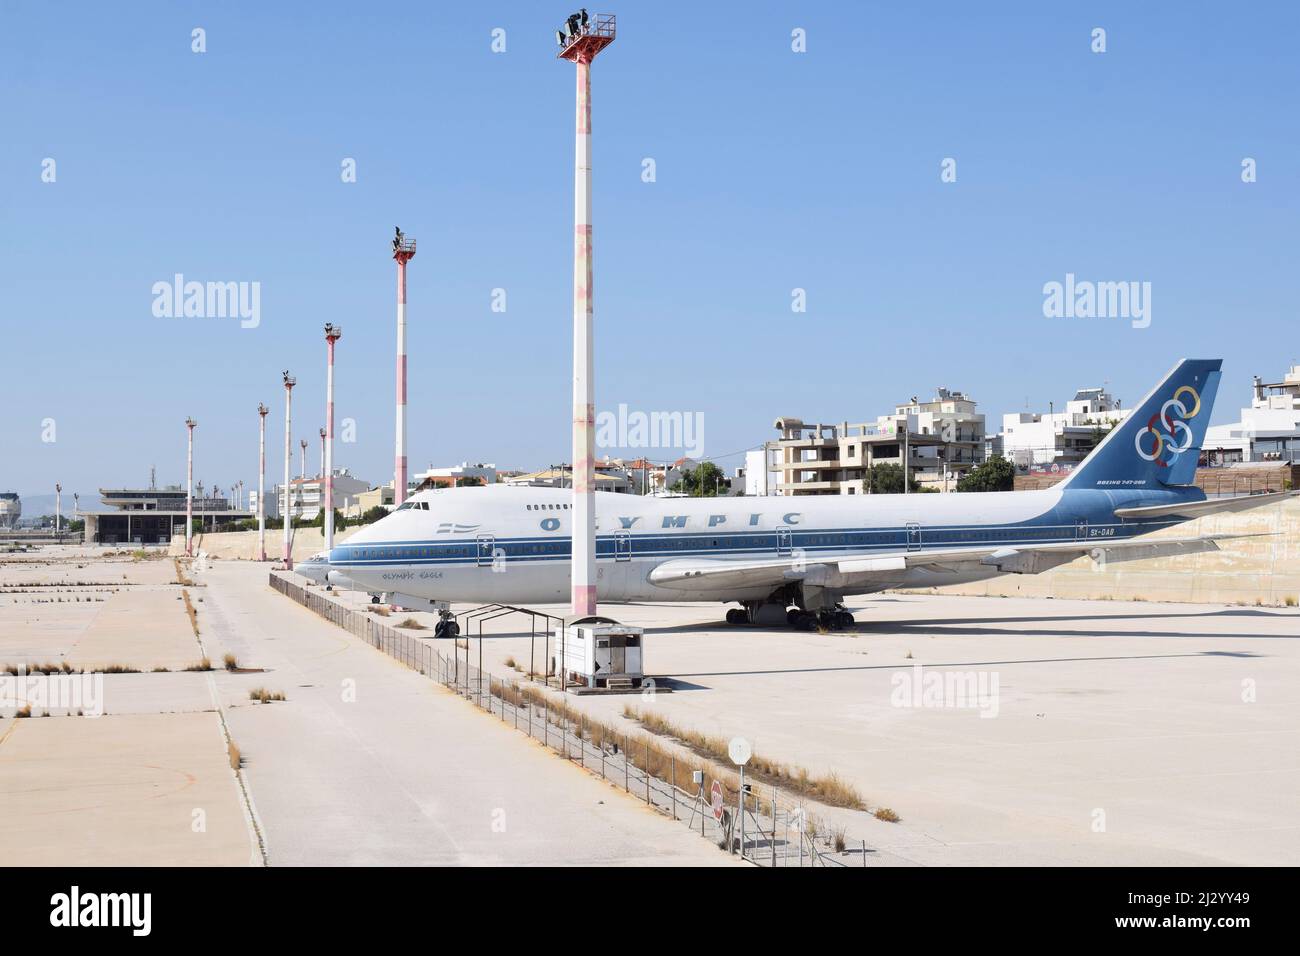 Abandoned International Airport of Ellinikon (or Hellinikon) with several old aircrafts. Old airplanes of Olympic Airways at Ellinikon, Greece Stock Photo